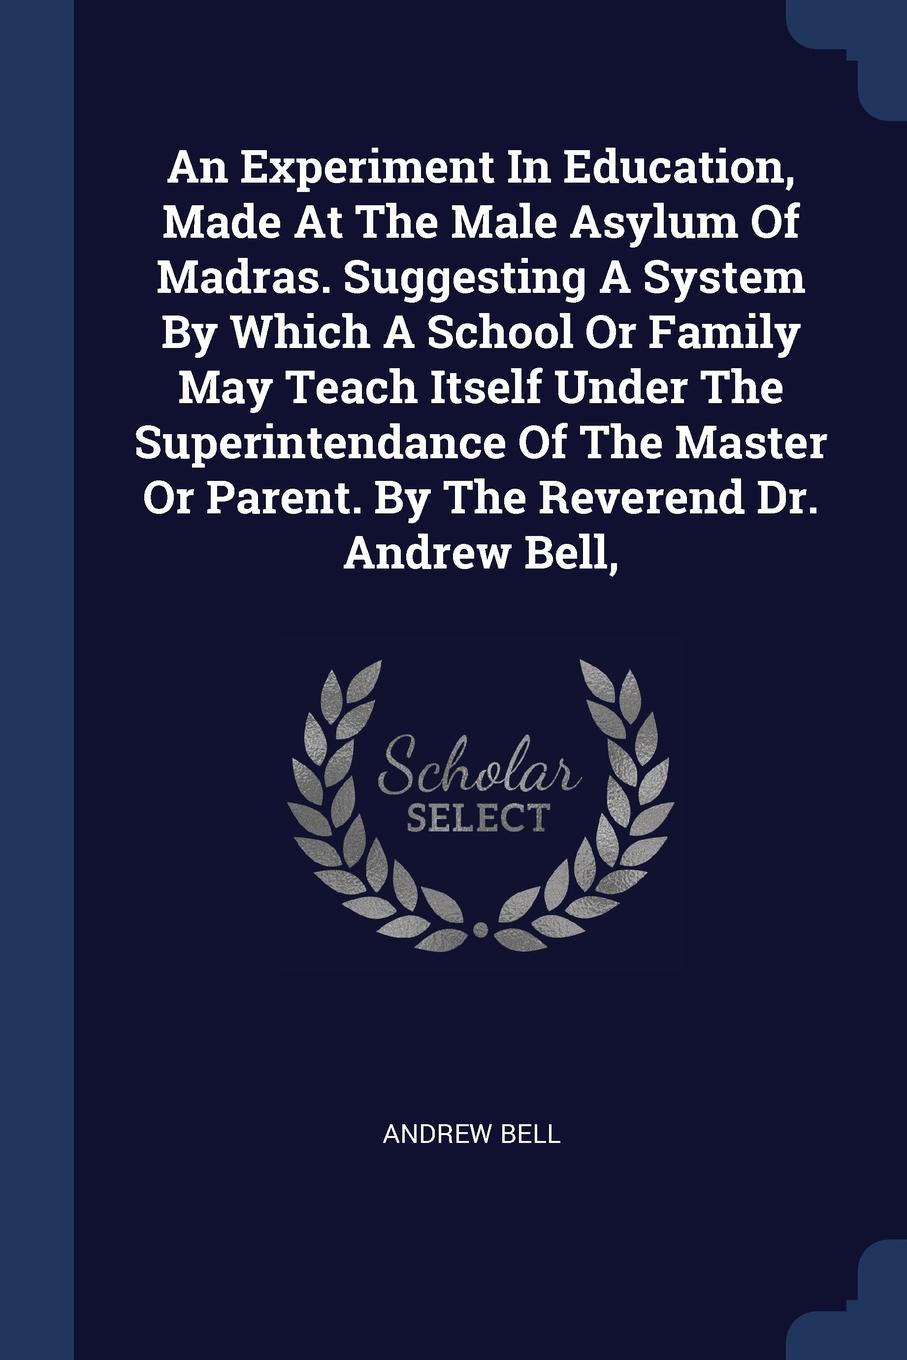 An Experiment In Education, Made At The Male Asylum Of Madras. Suggesting A System By Which A School Or Family May Teach Itself Under The Superintendance Of The Master Or Parent. By The Reverend Dr. Andrew Bell,